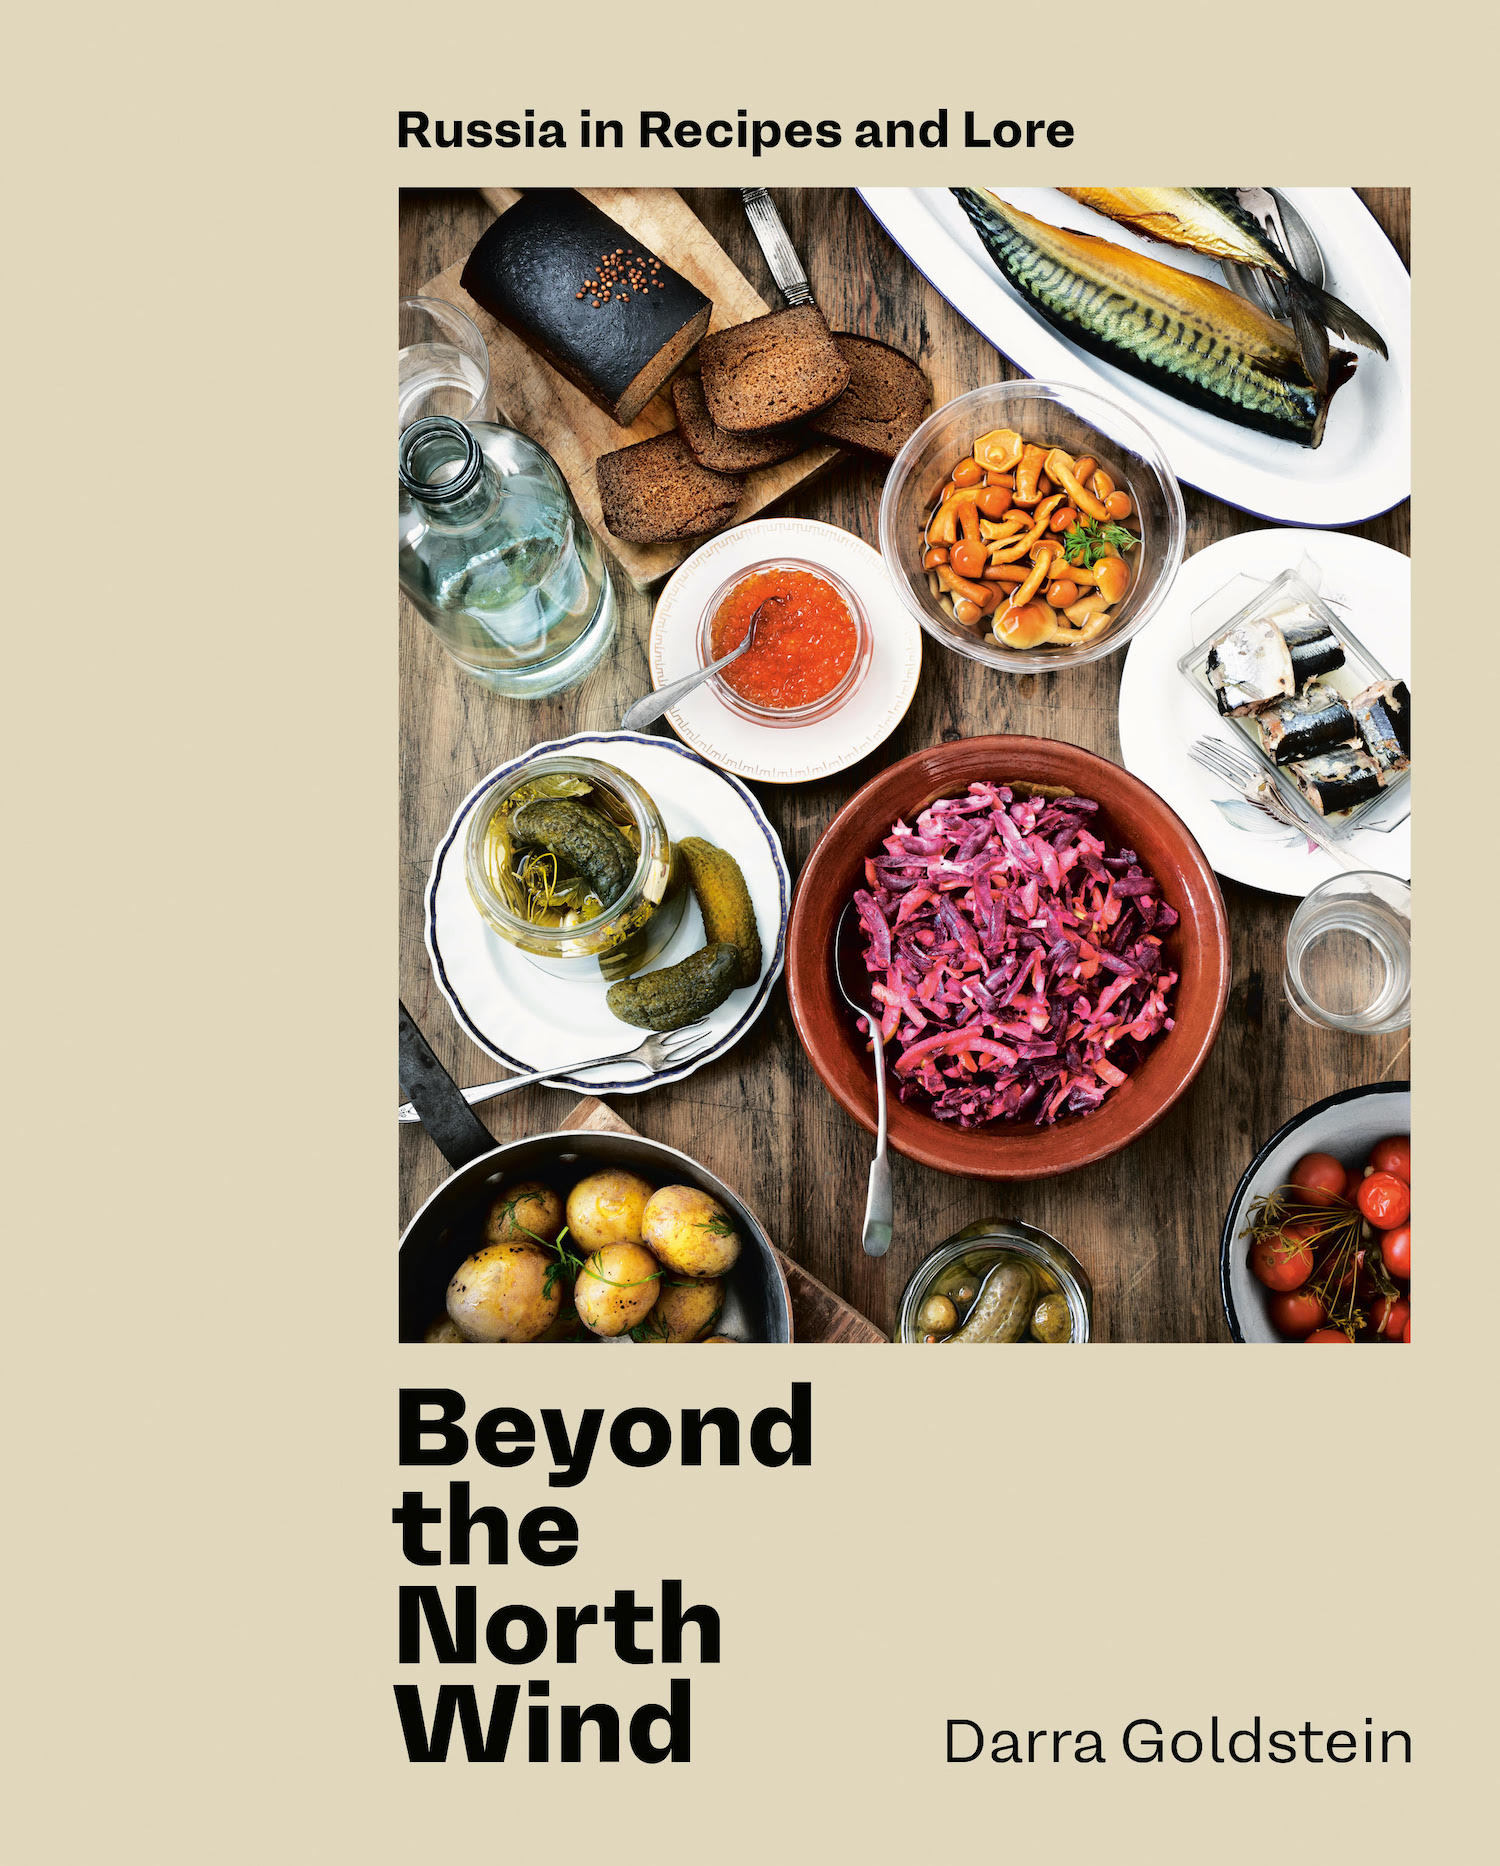 Cookbook cover of Beyond the North Wind by Darra Goldstein by Ten Speed Press. September 2021